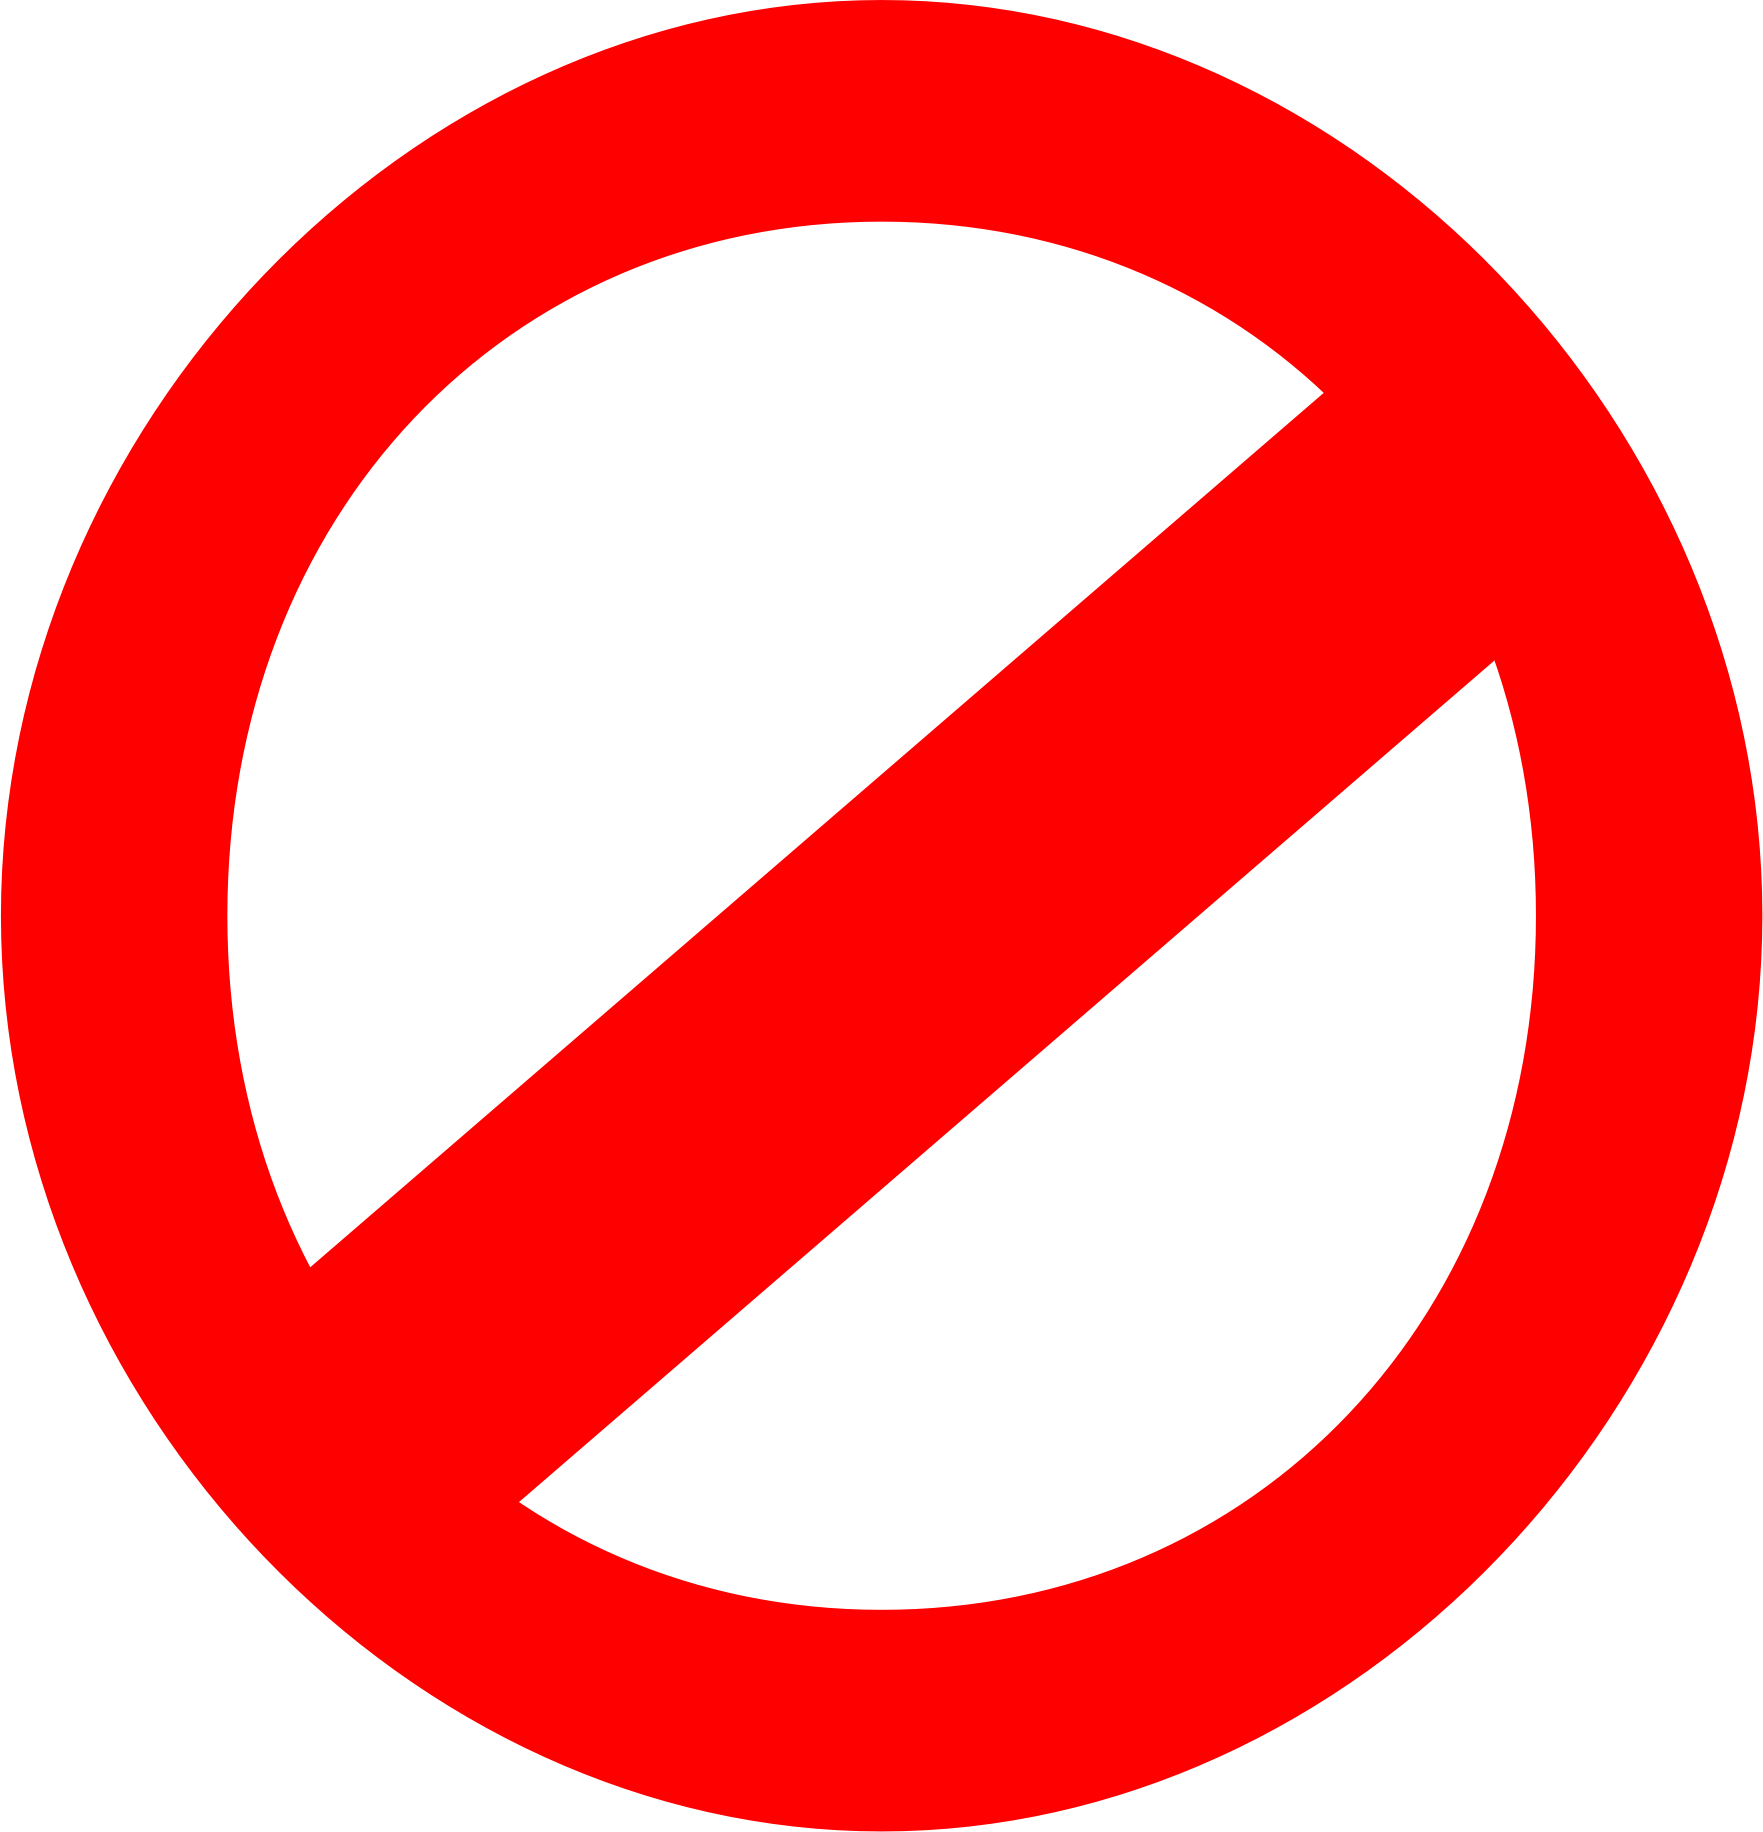 Red Forbidden Sign Clipart Free Image Download 0738